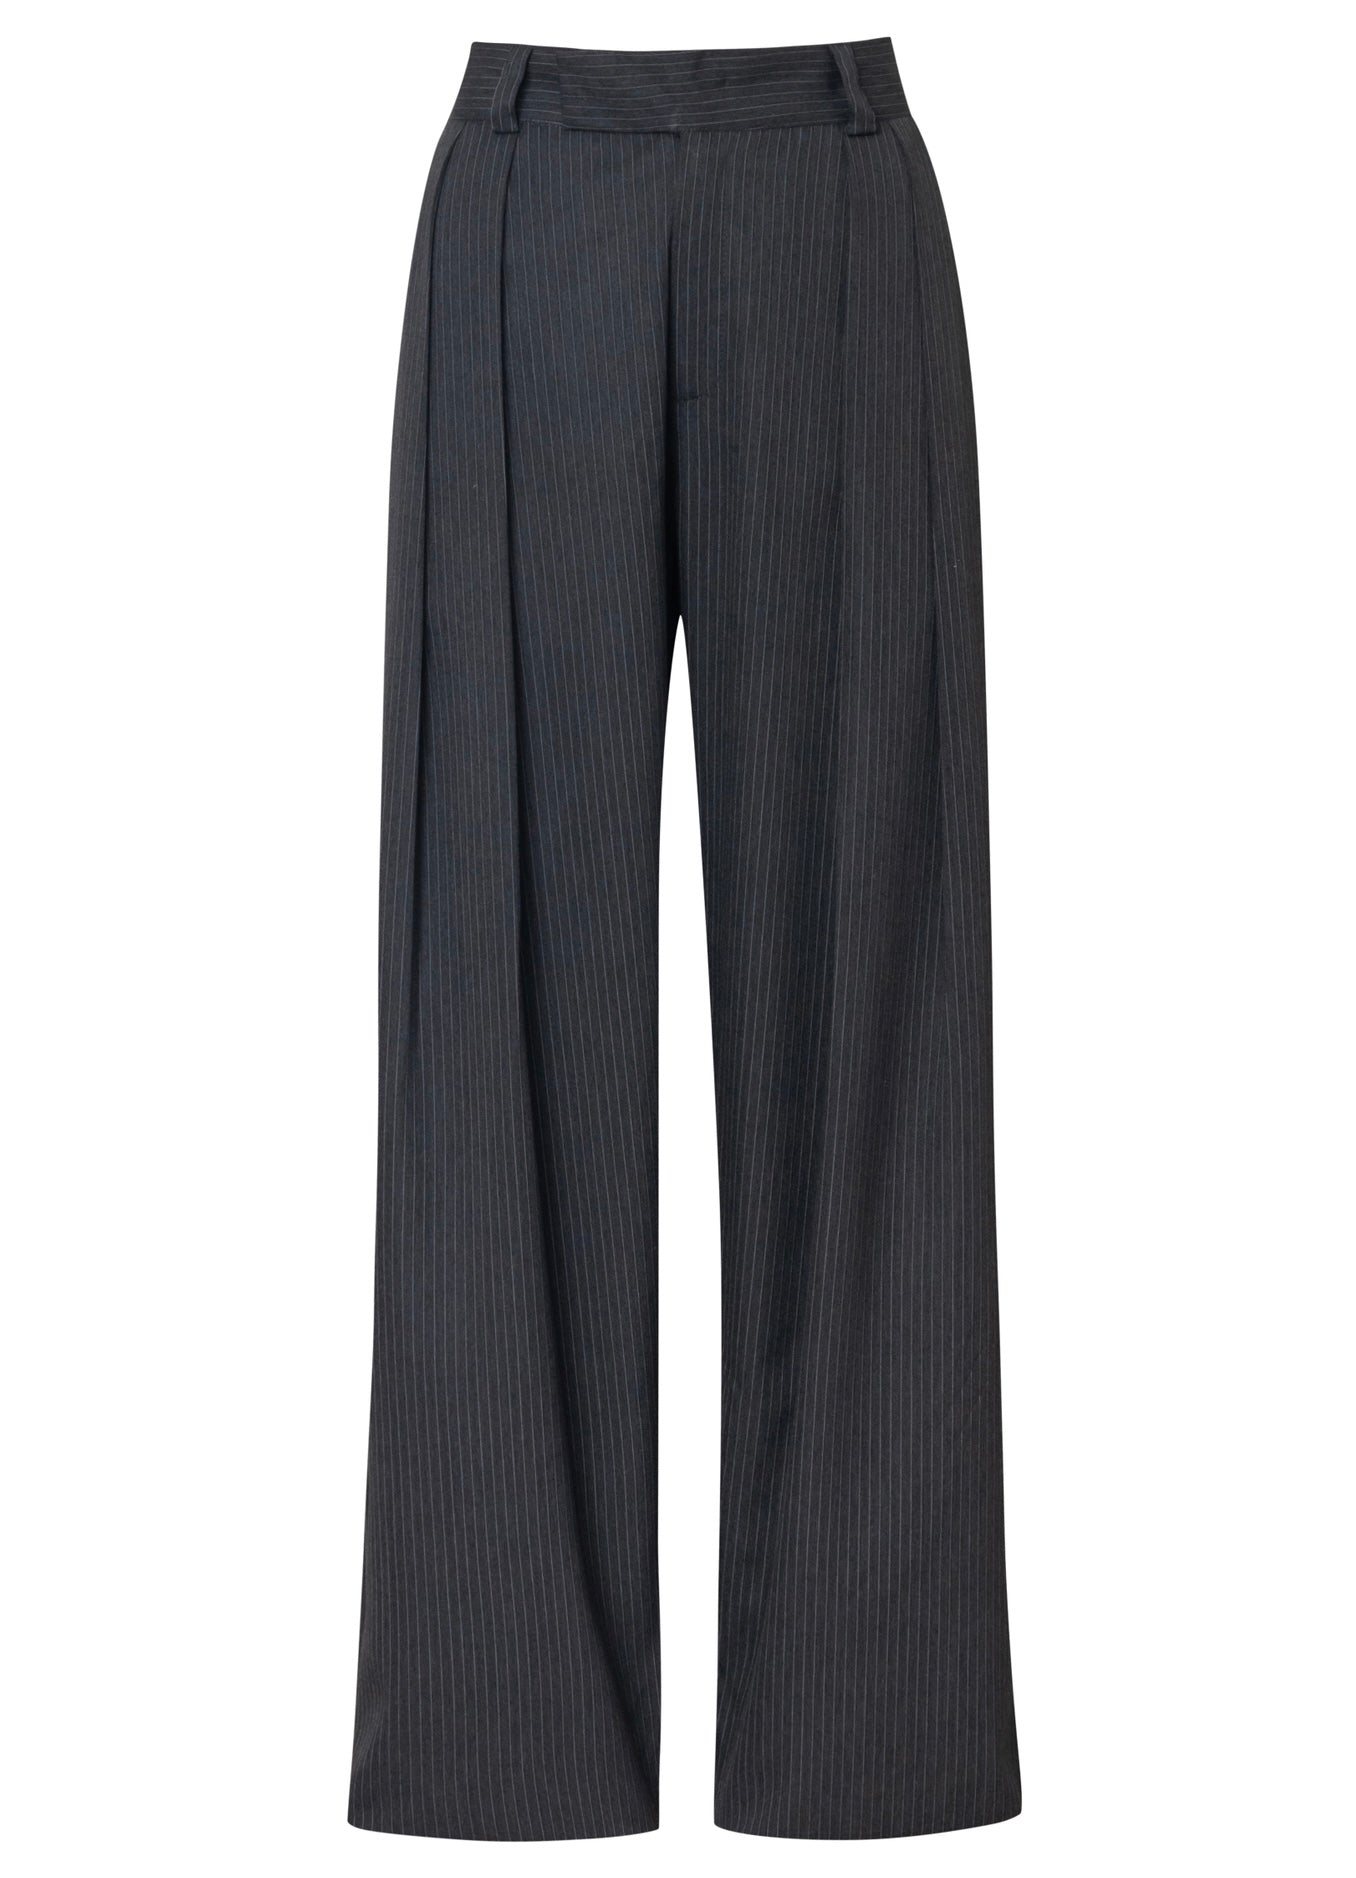 THE OFFICE PANTS